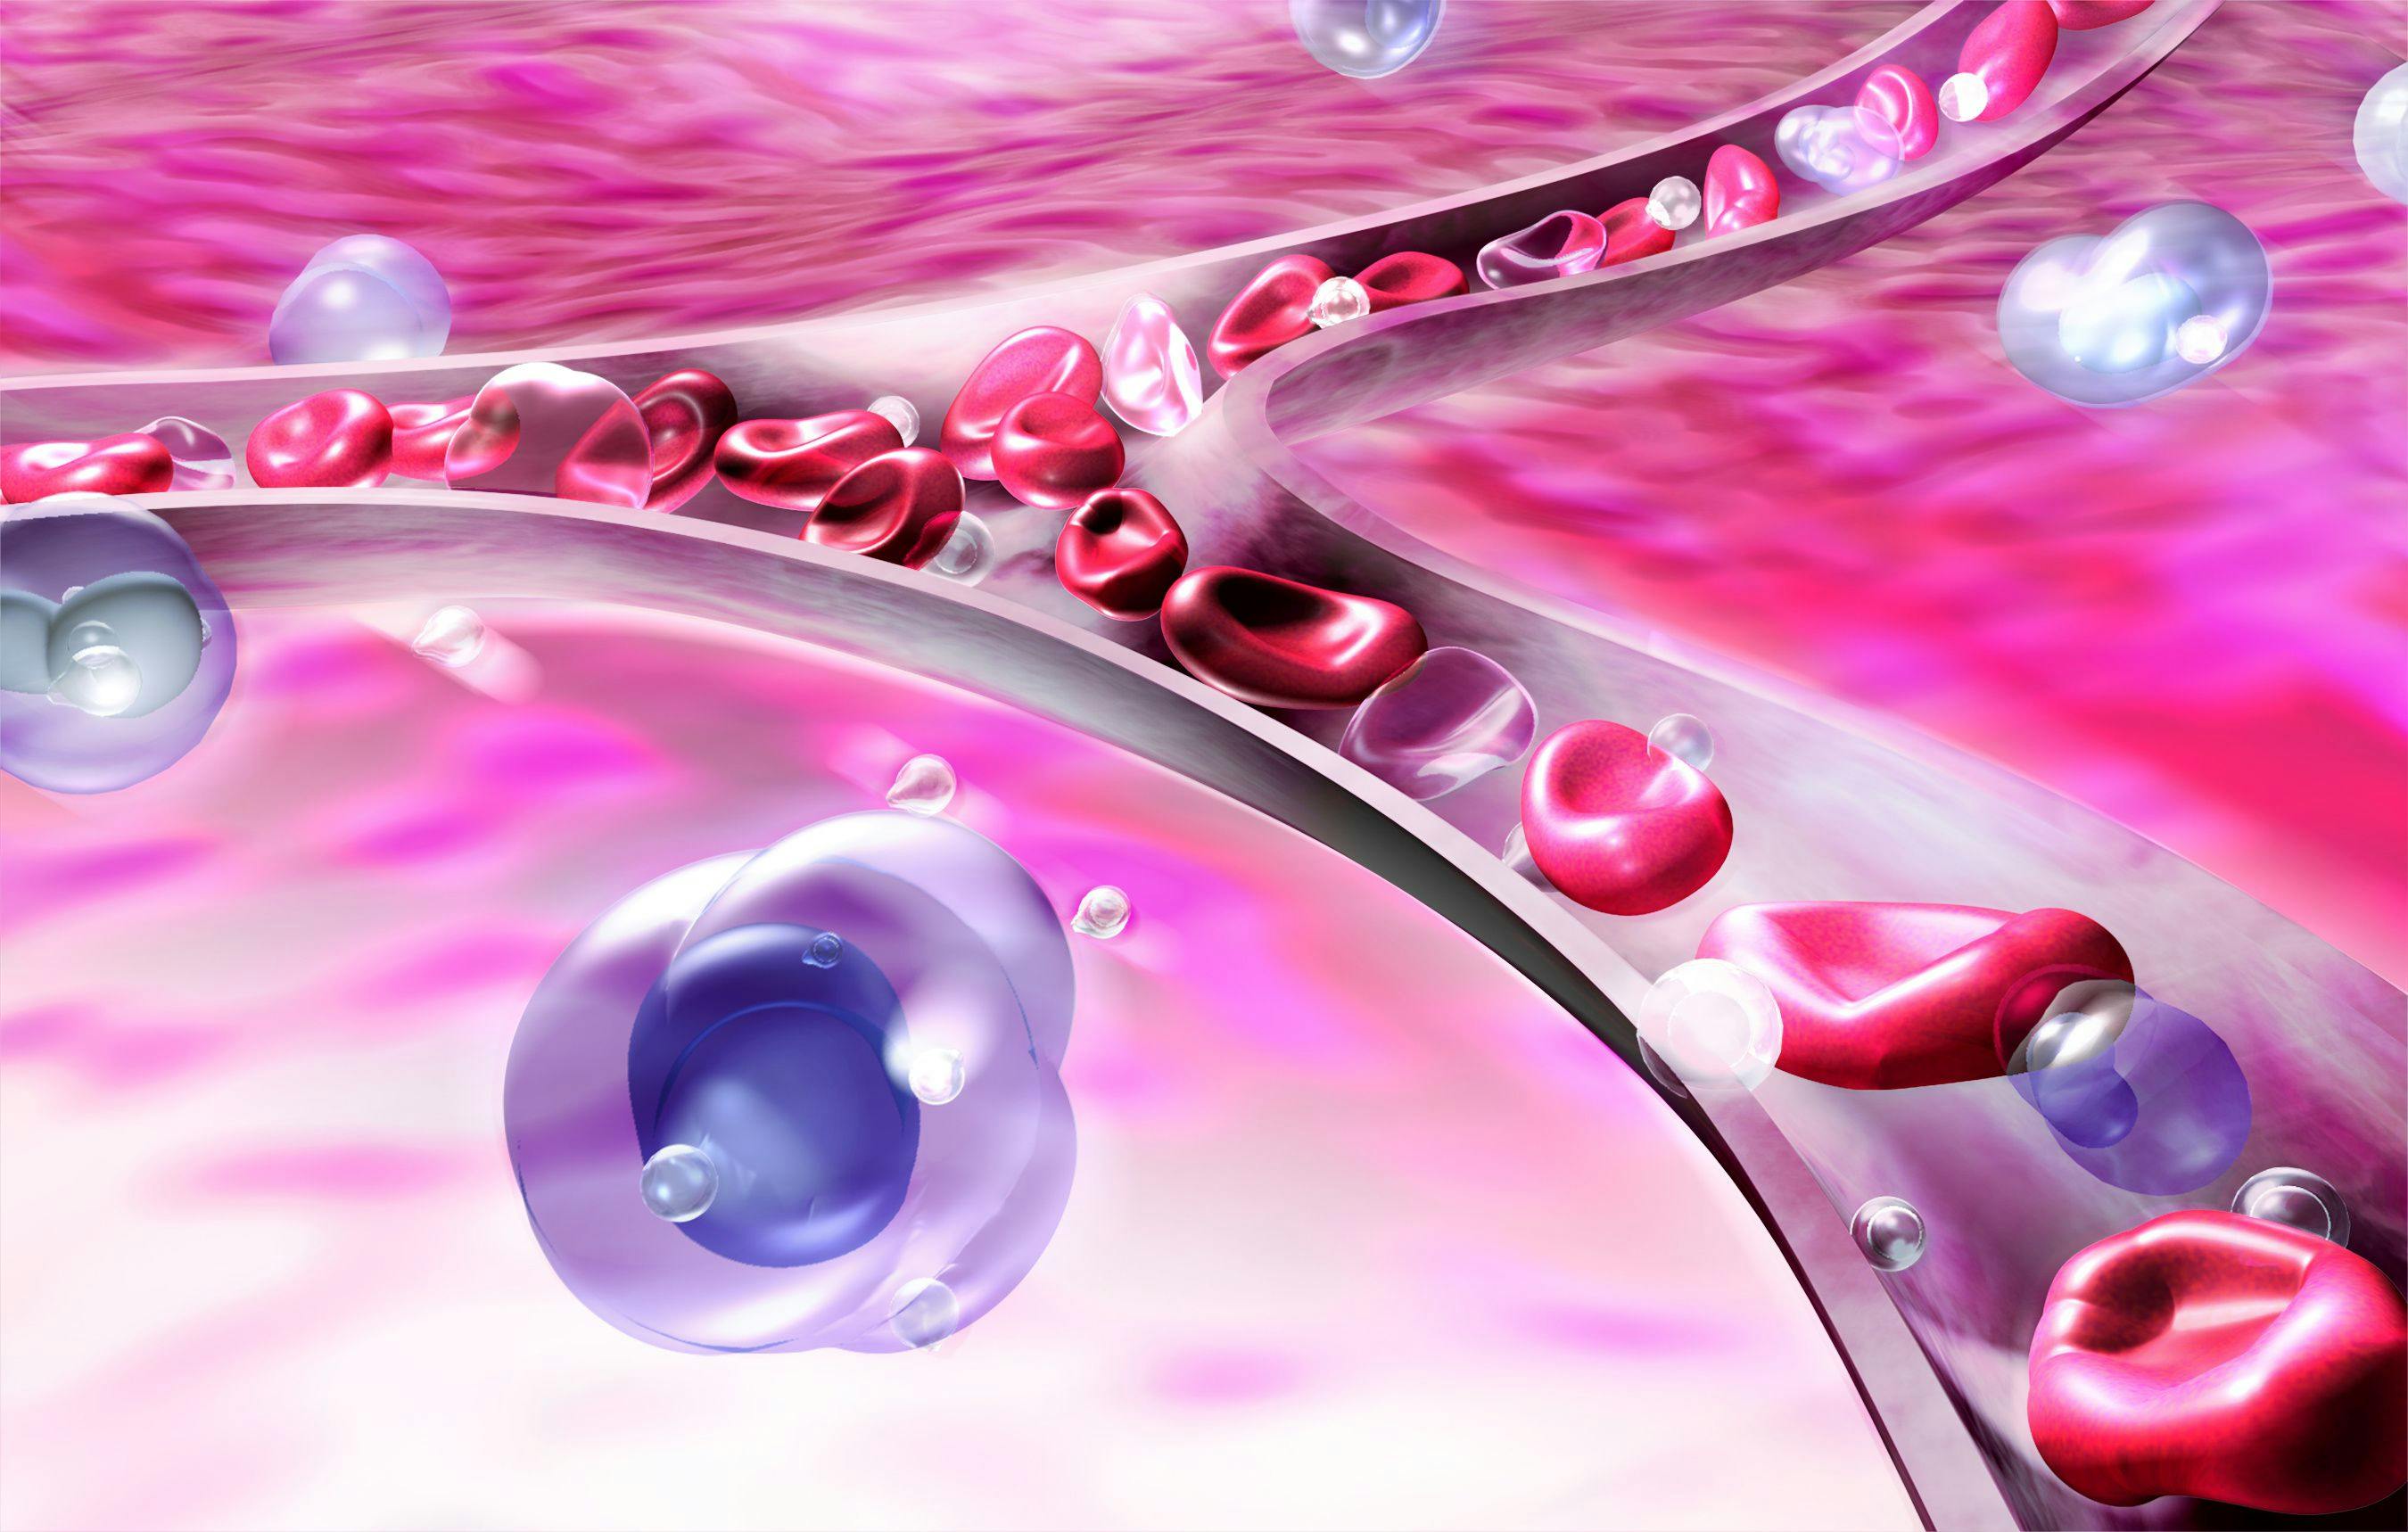 Image Credit: © PepeGallardo - www.stock.adobe.com | 3d illustration of the anatomy of a vein or artery and blood circulation. On organic background with moving blood cells and platelets.